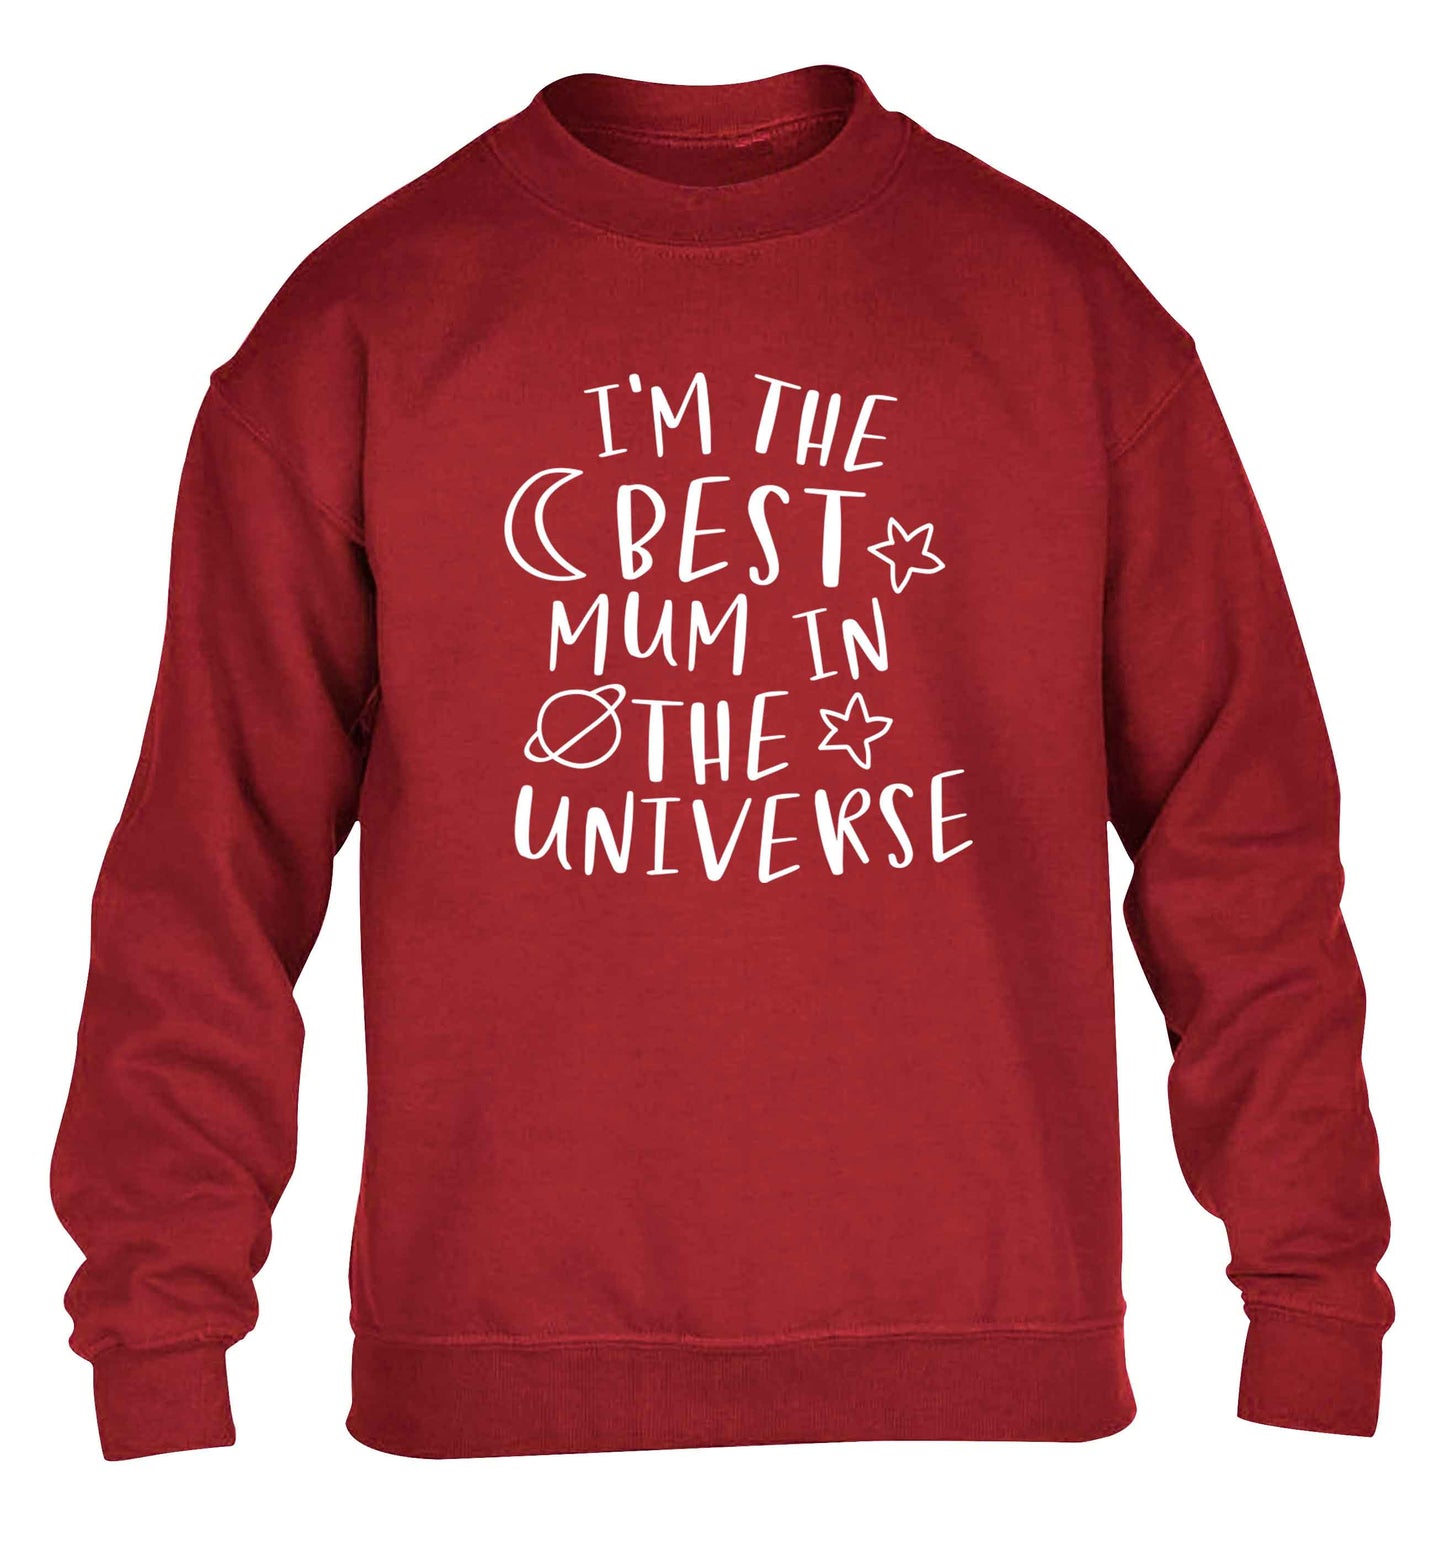 I'm the best mum in the universe children's grey sweater 12-13 Years